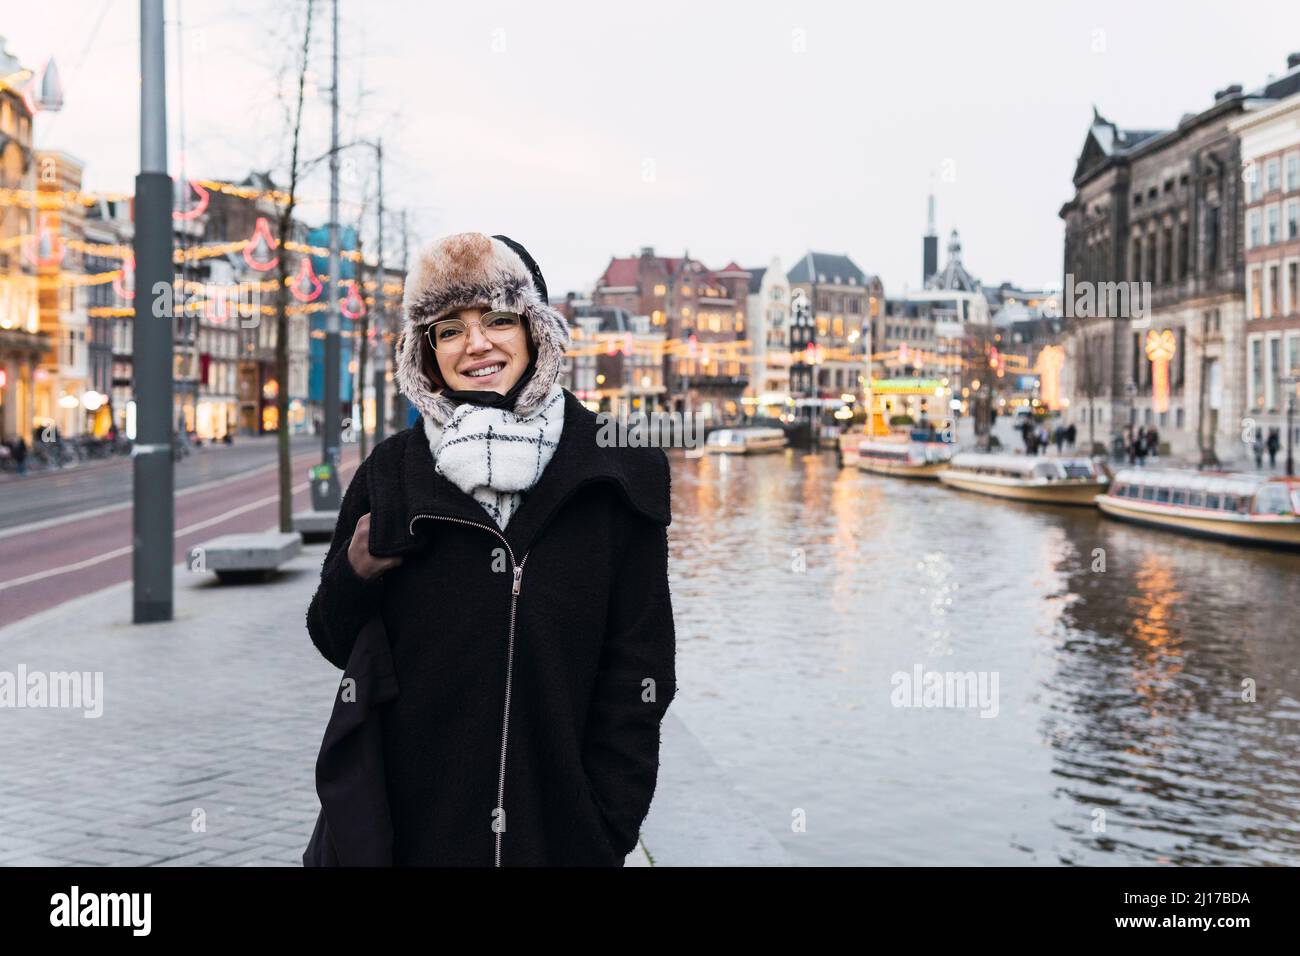 Smiling woman in winter hat by canal in city Stock Photo